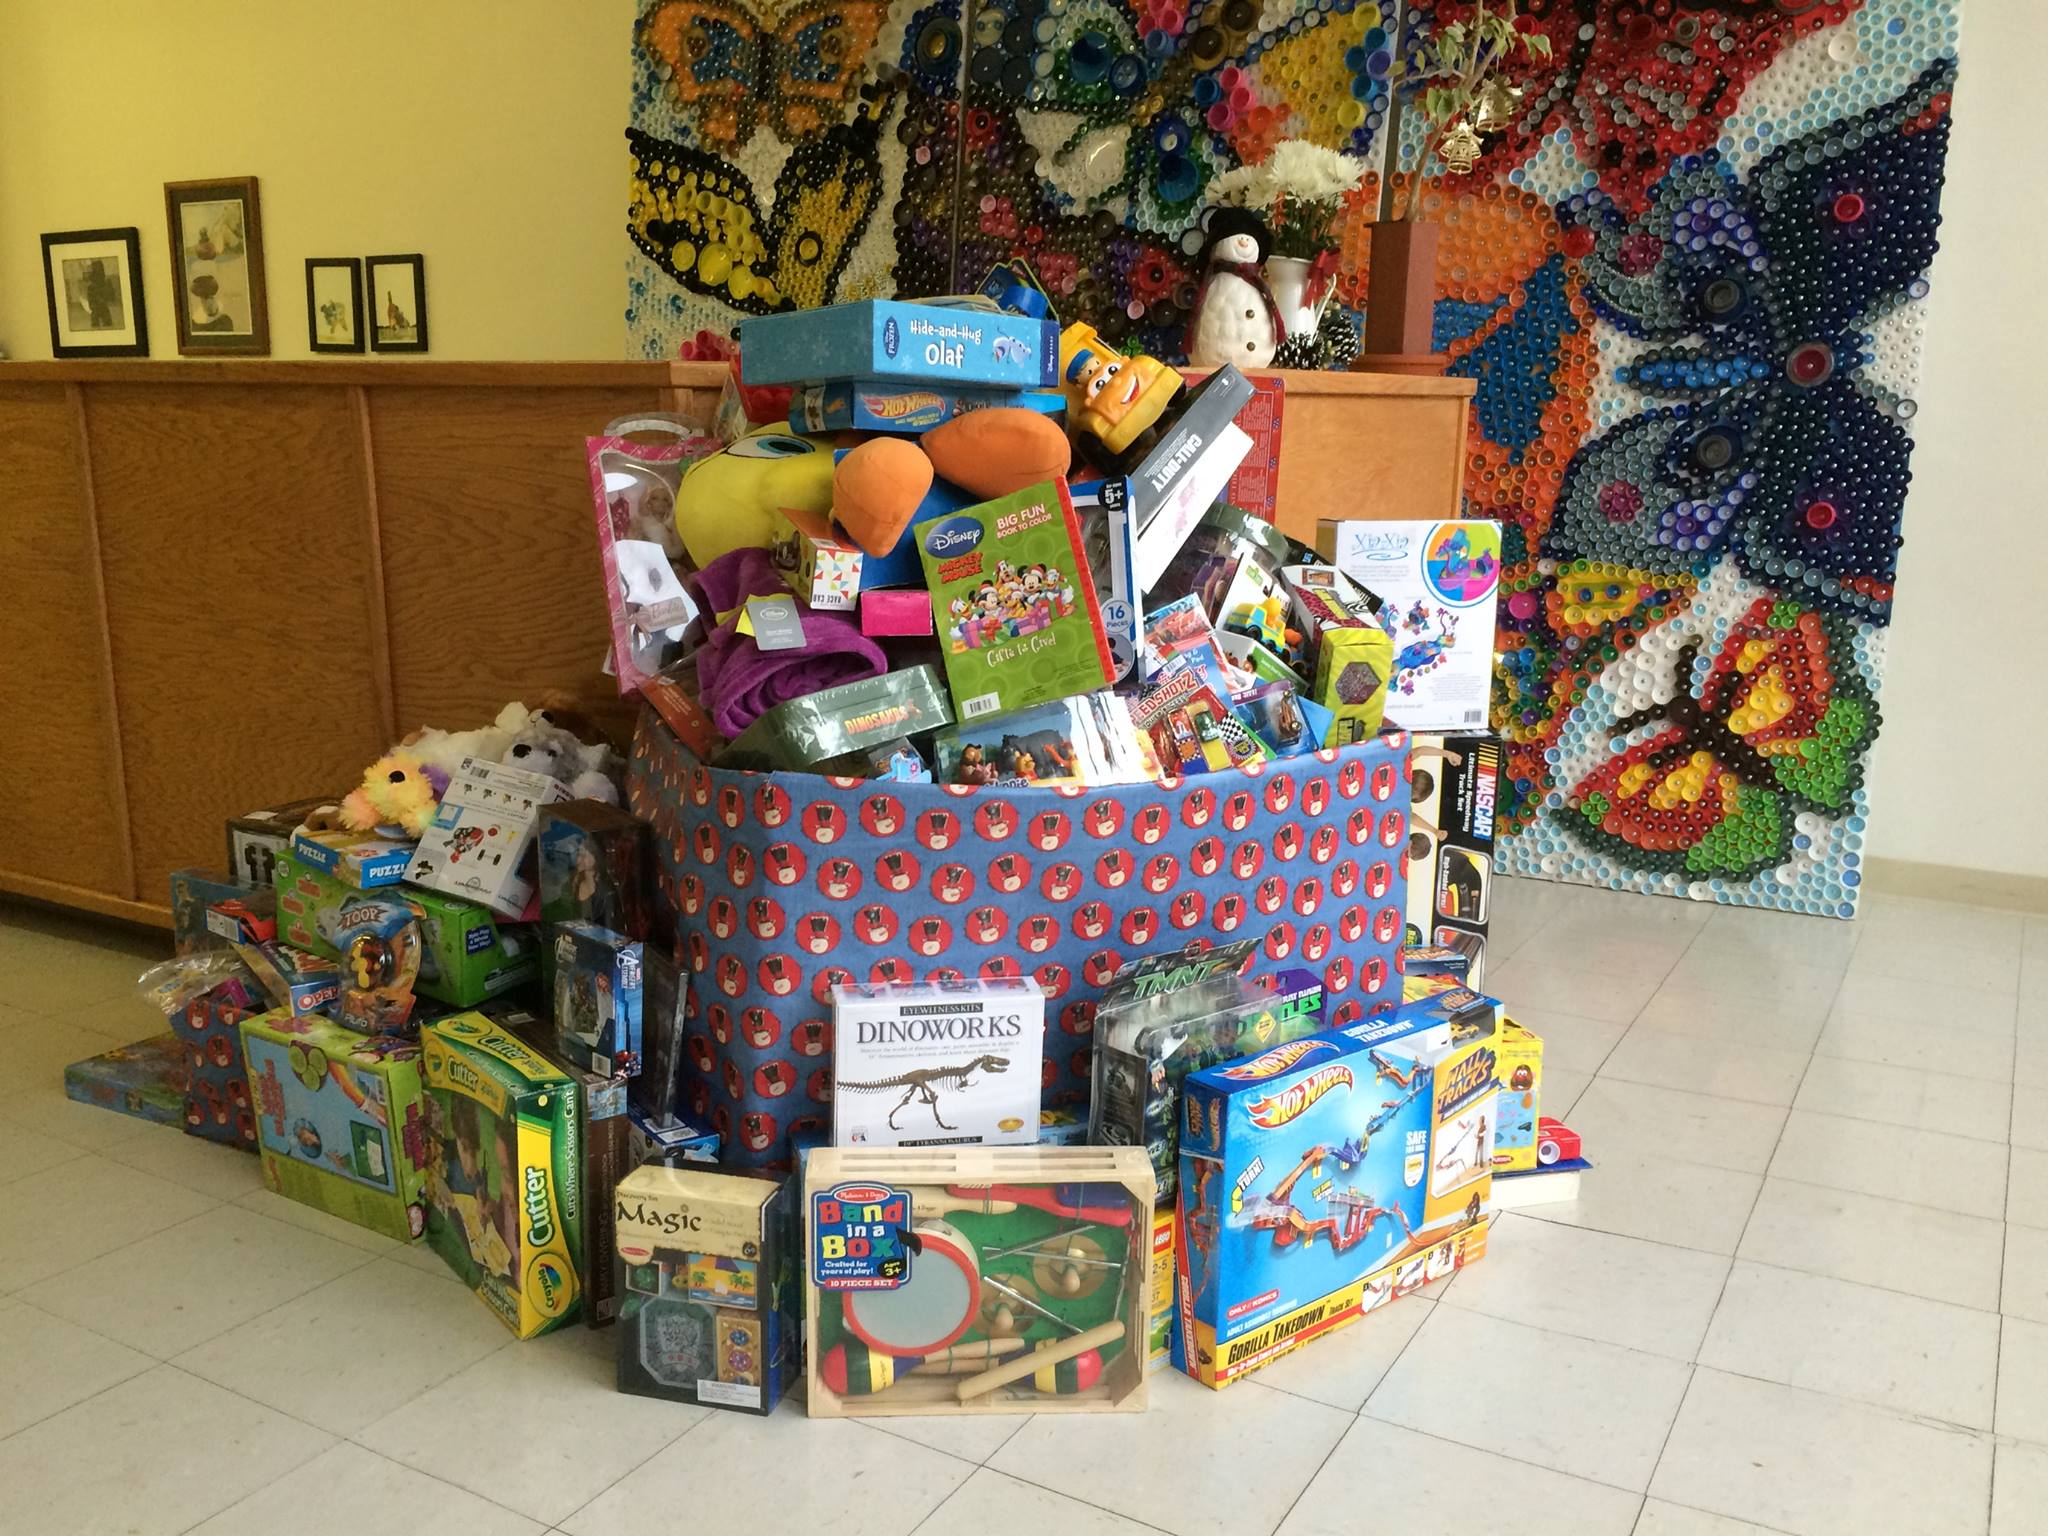 toys-for-tots-thedojo-toy-drive_23748290876_o.jpg